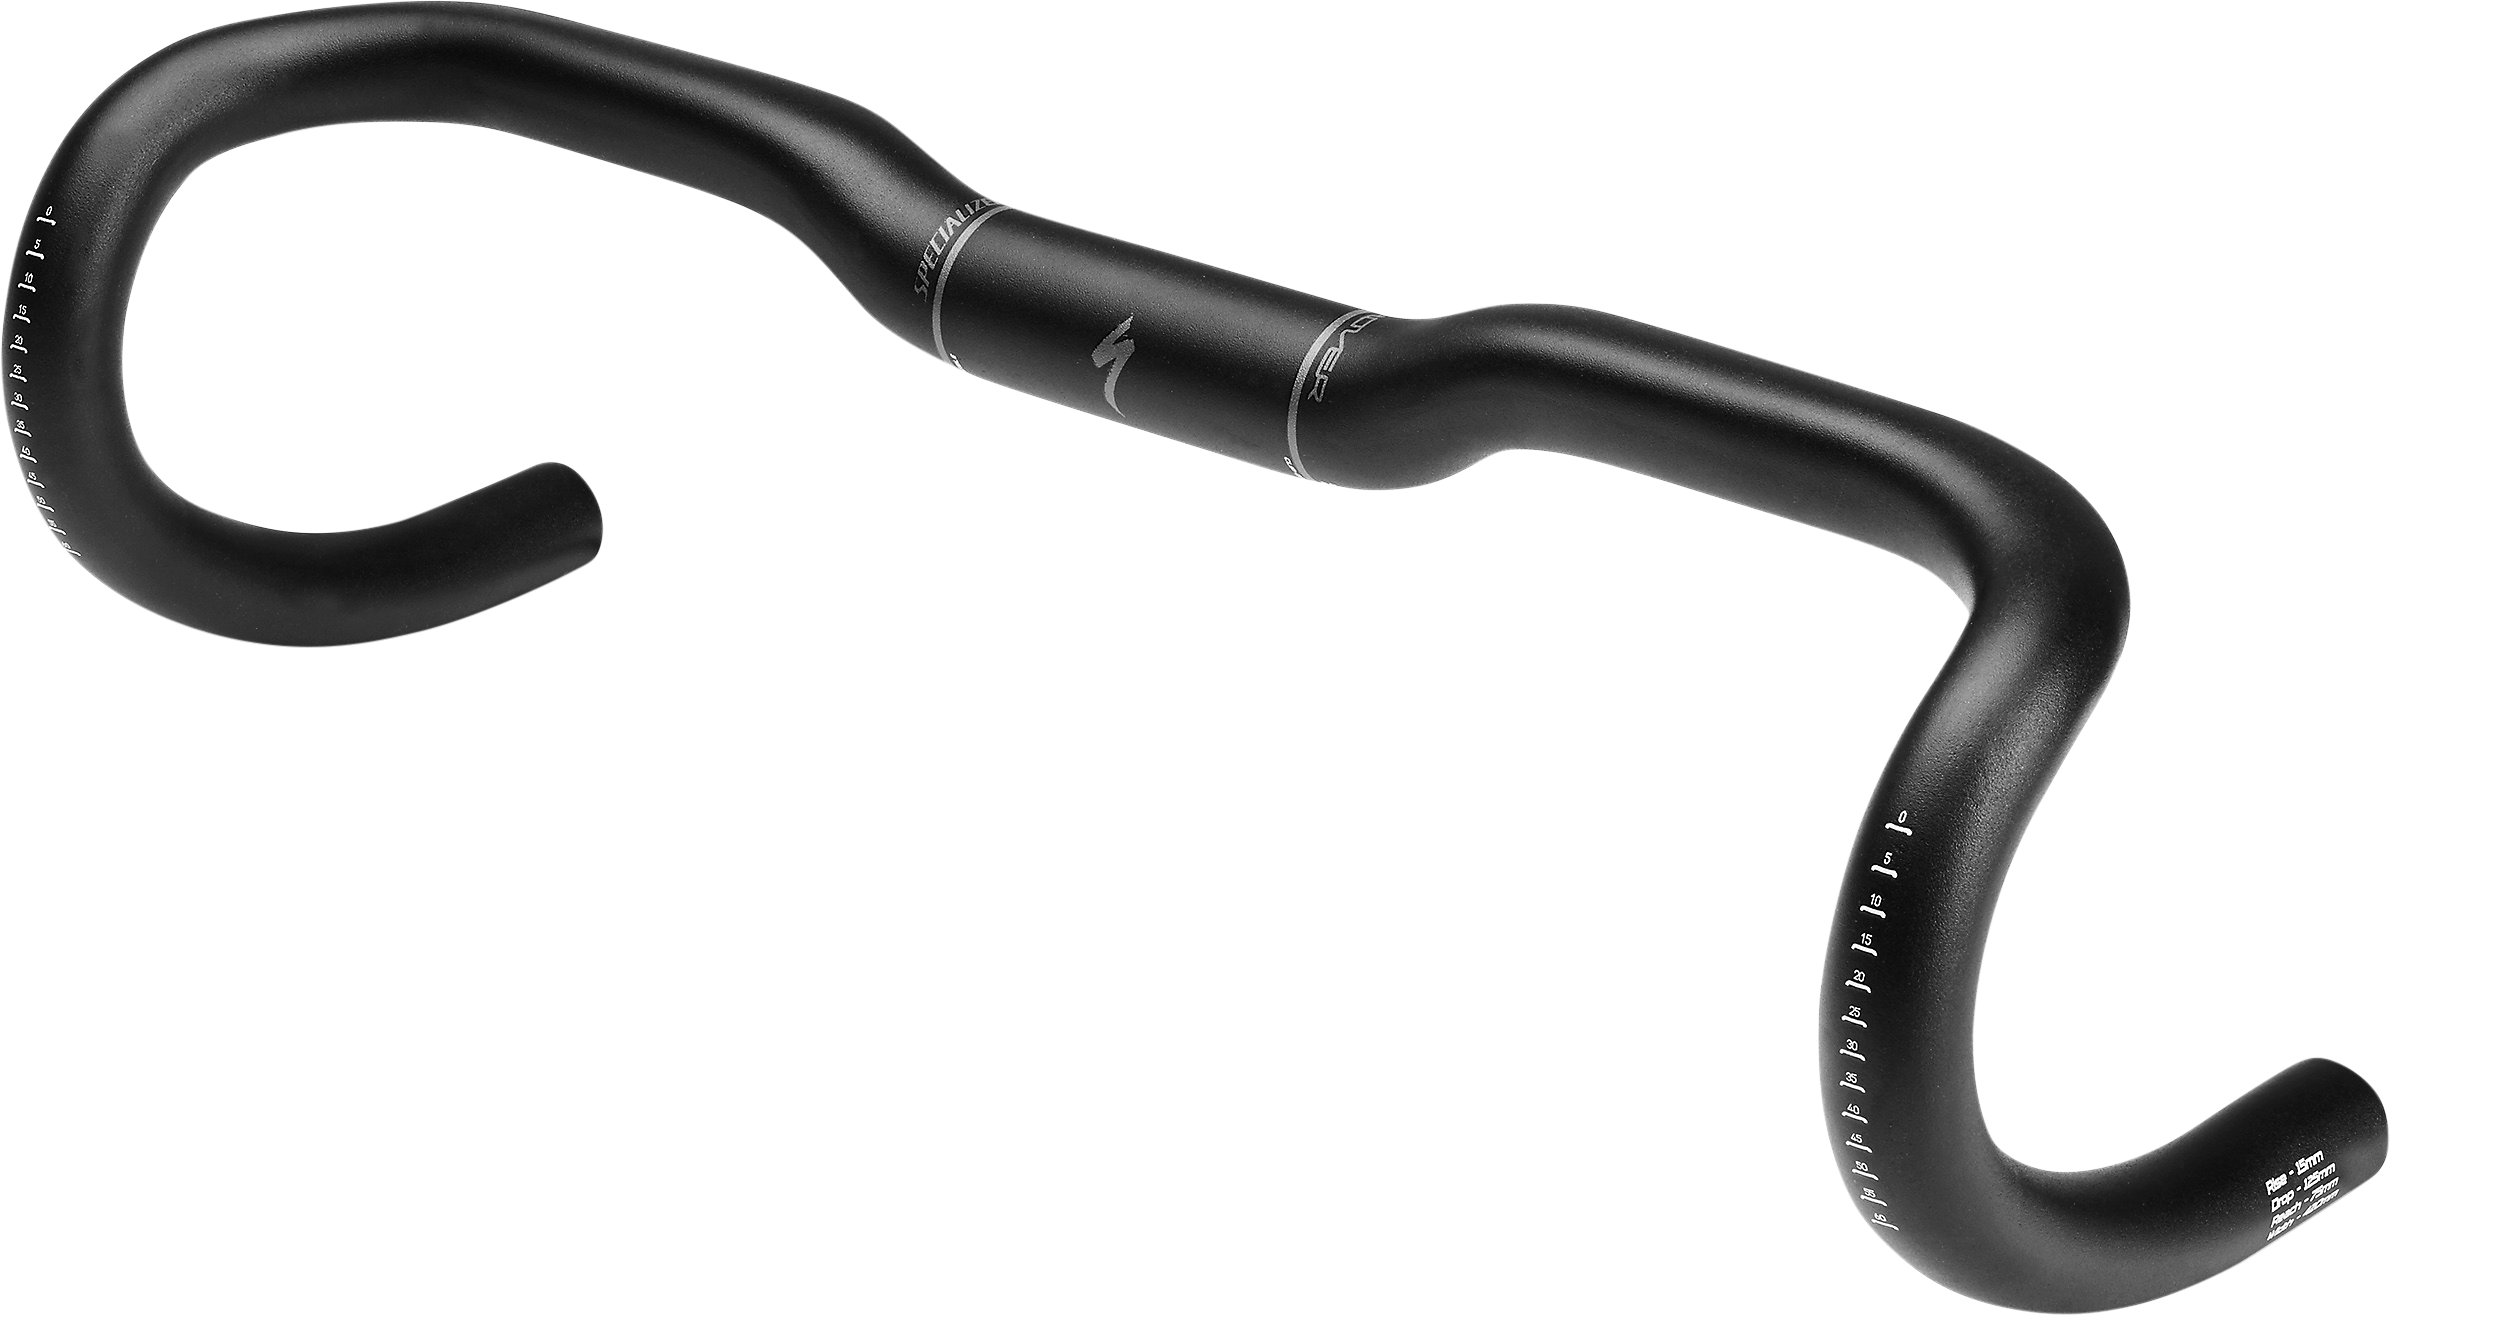 specialized road bars